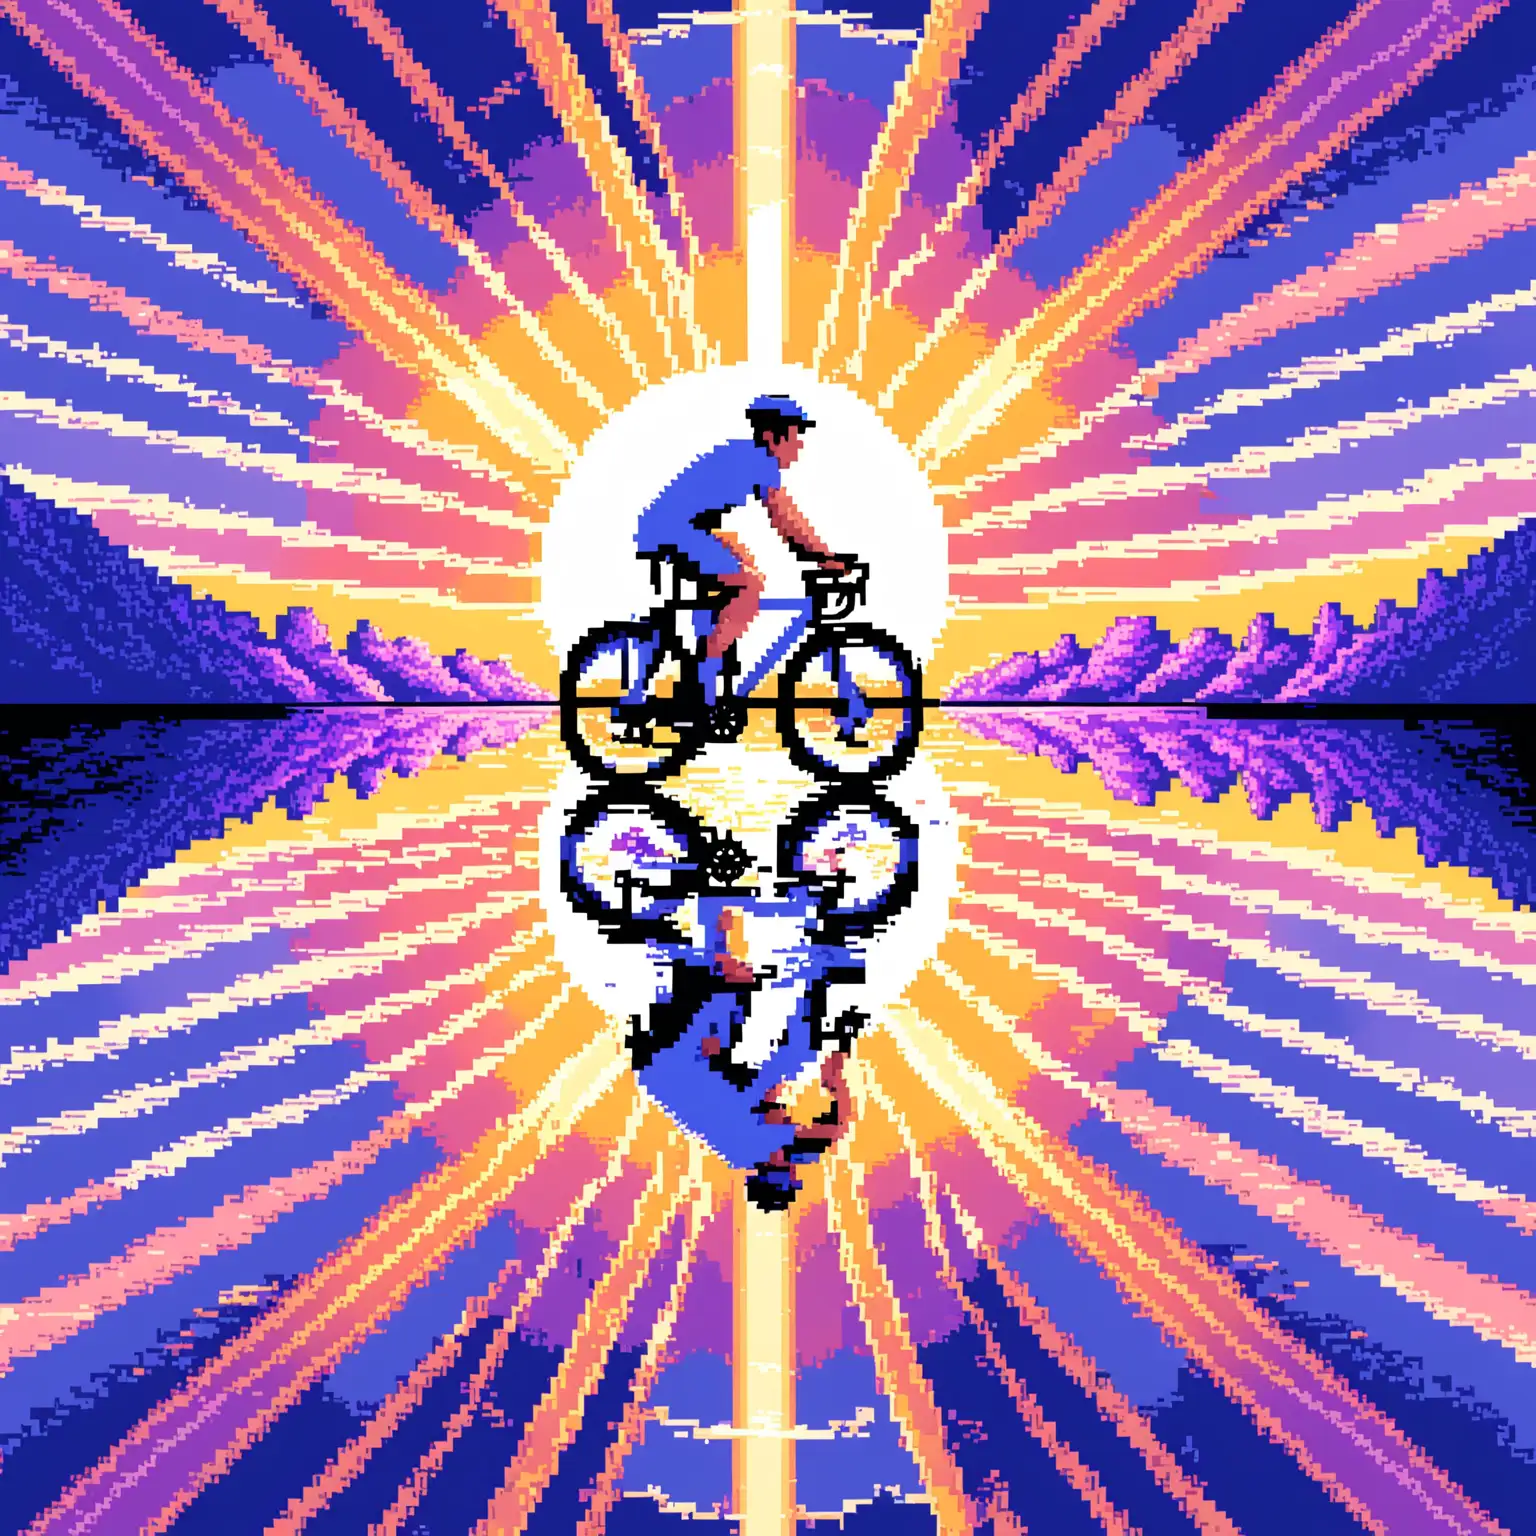 Cyclist-Riding-Bicycle-in-Pixel-Art-Style-with-Sun-Reflection